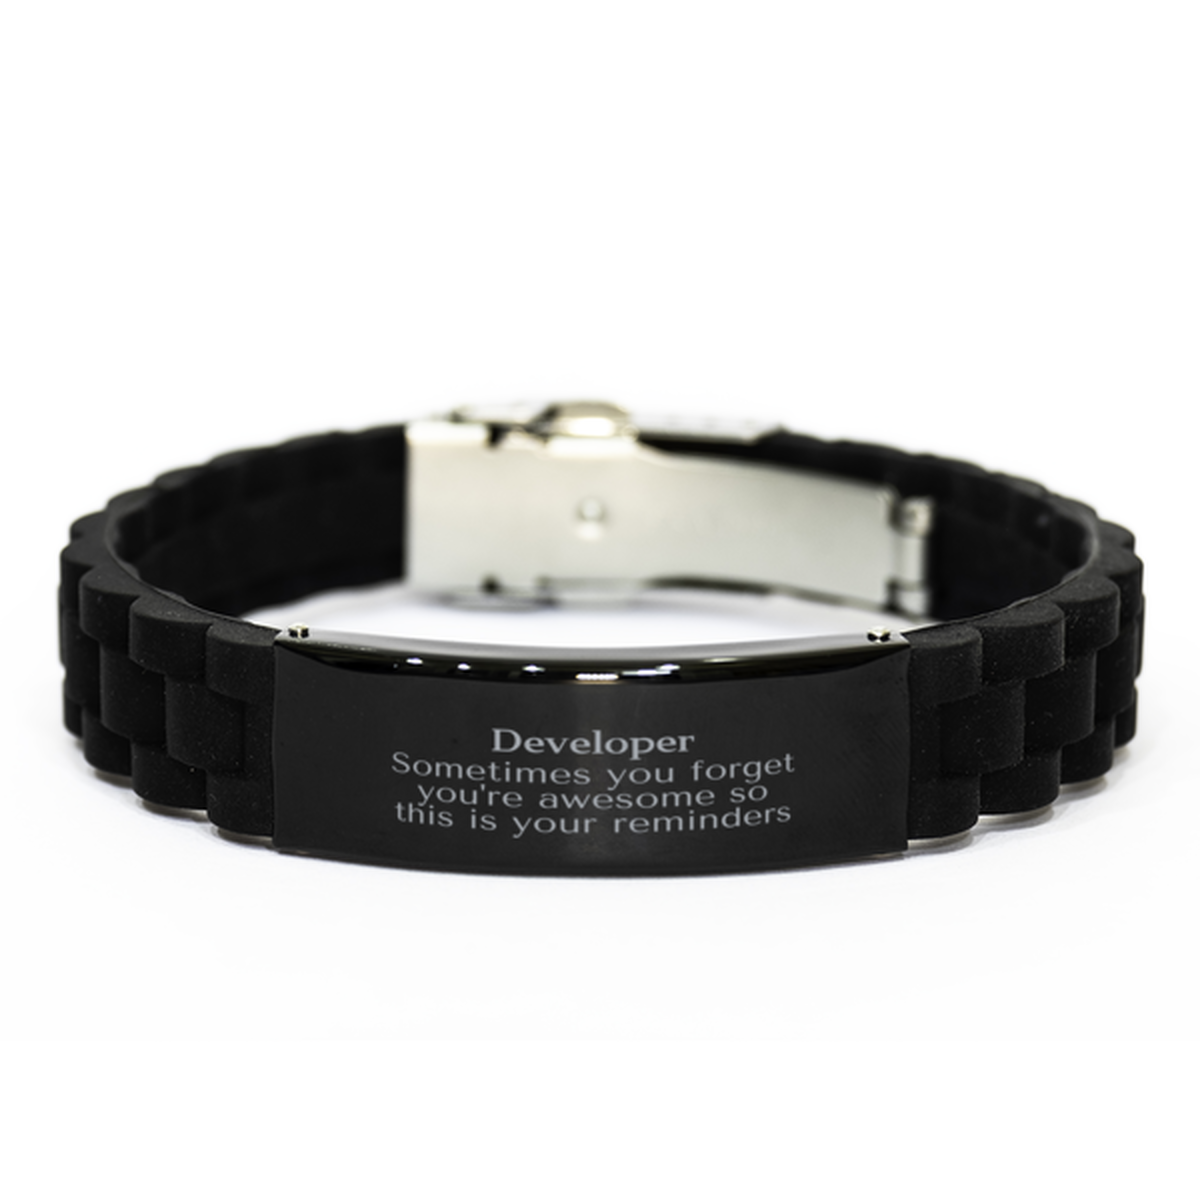 Sentimental Developer Black Glidelock Clasp Bracelet, Developer Sometimes you forget you're awesome so this is your reminders, Graduation Christmas Birthday Gifts for Developer, Men, Women, Coworkers